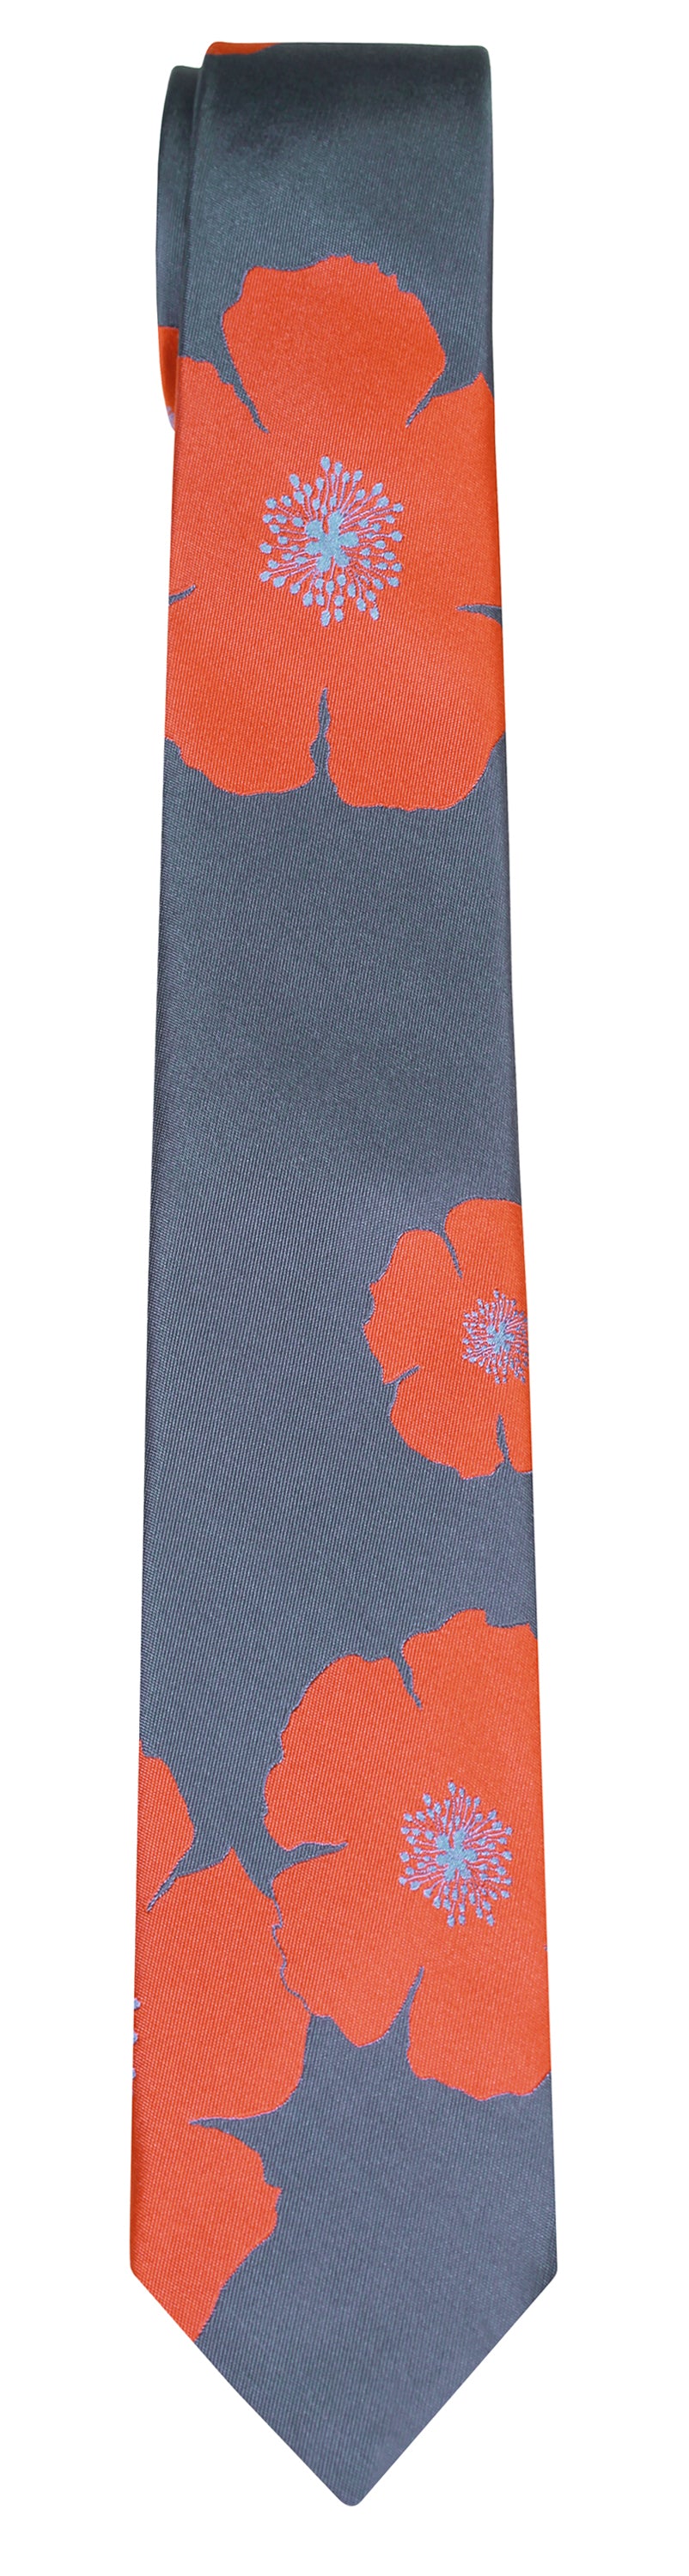 Mimi Fong Poppies Tie in Charcoal